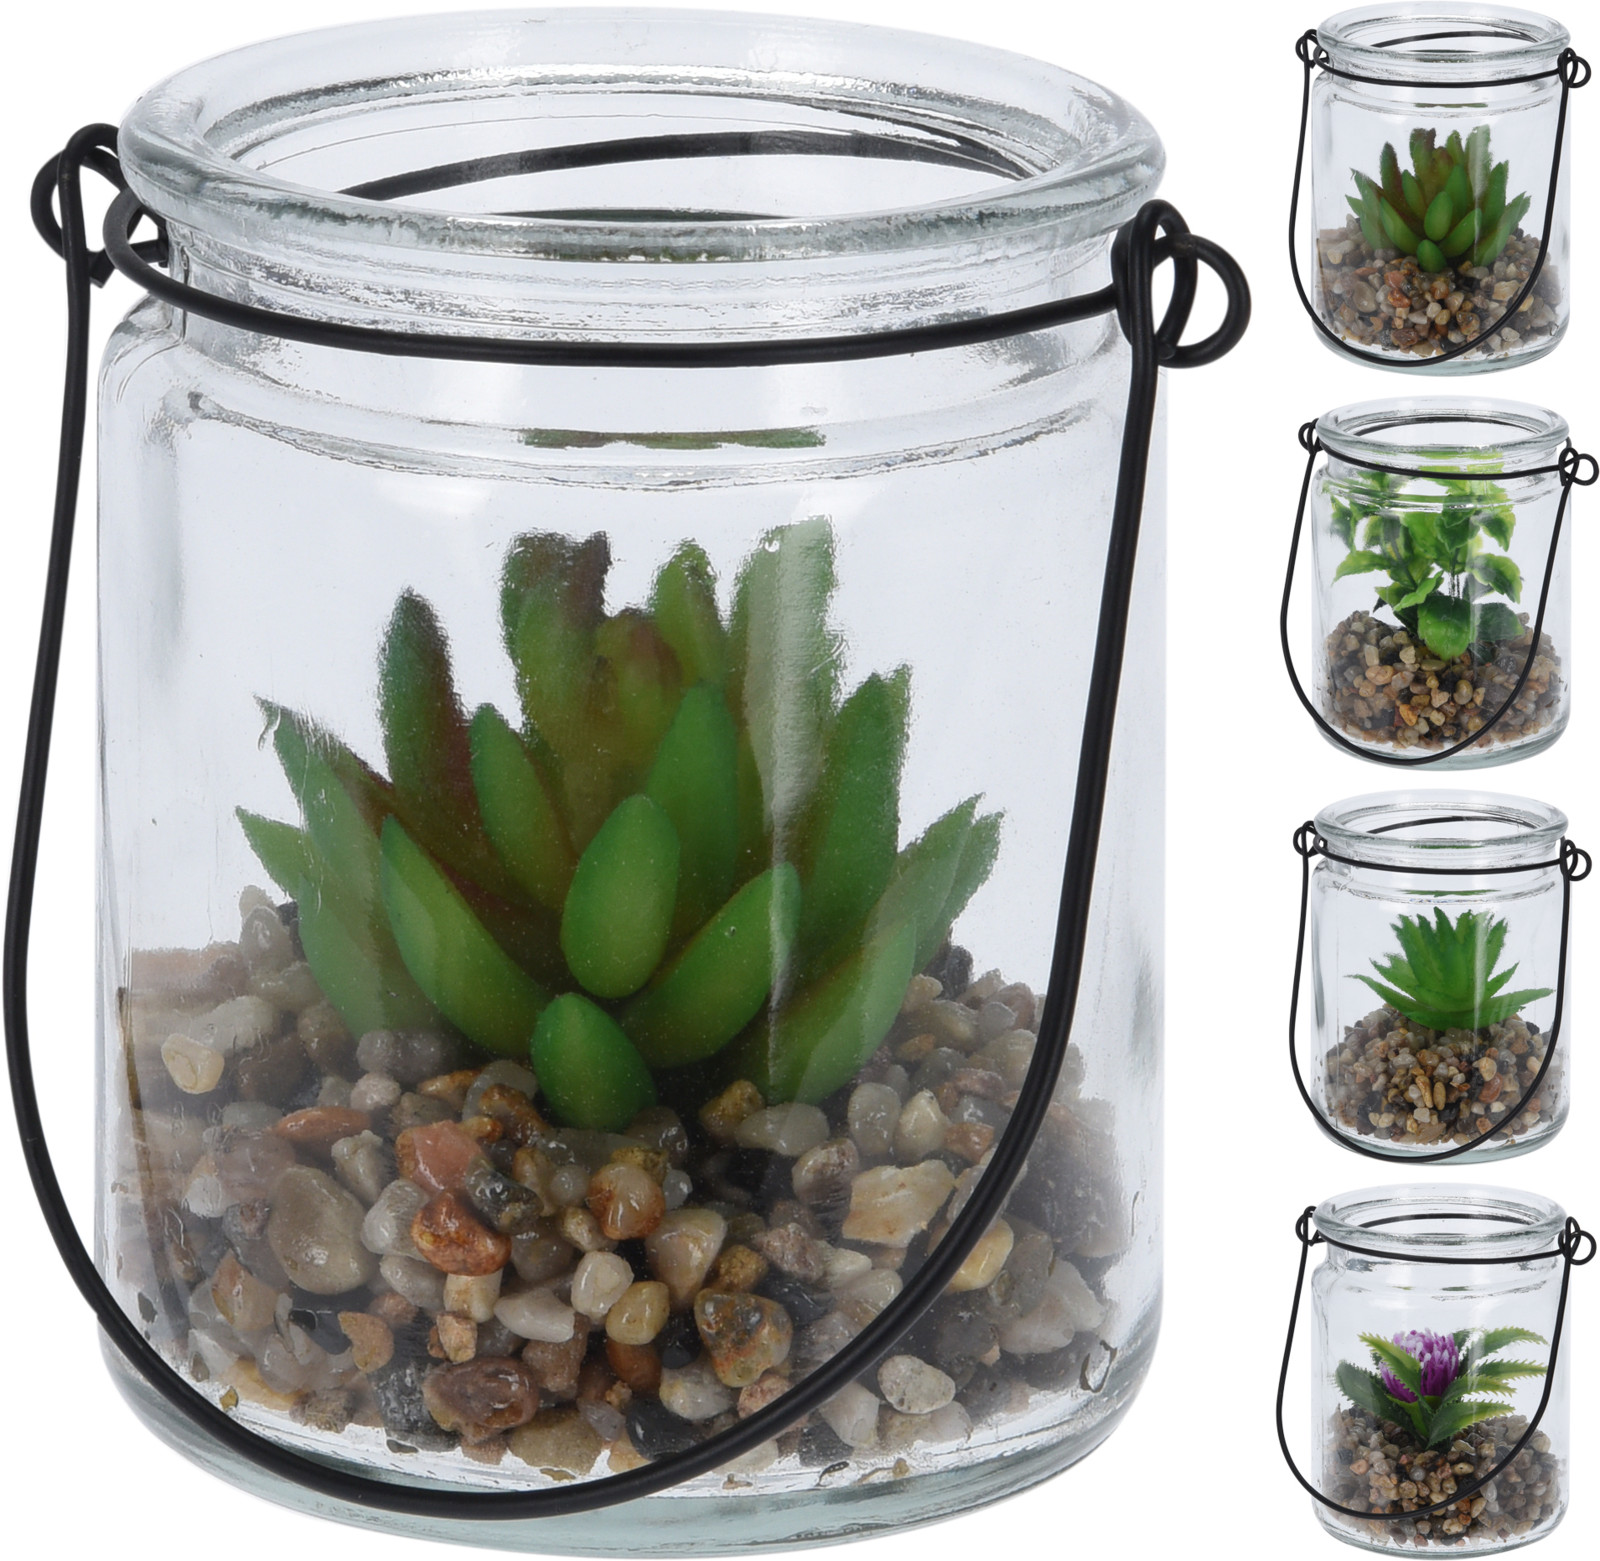 PLANT ARTIFICIAL IN GLASS POT